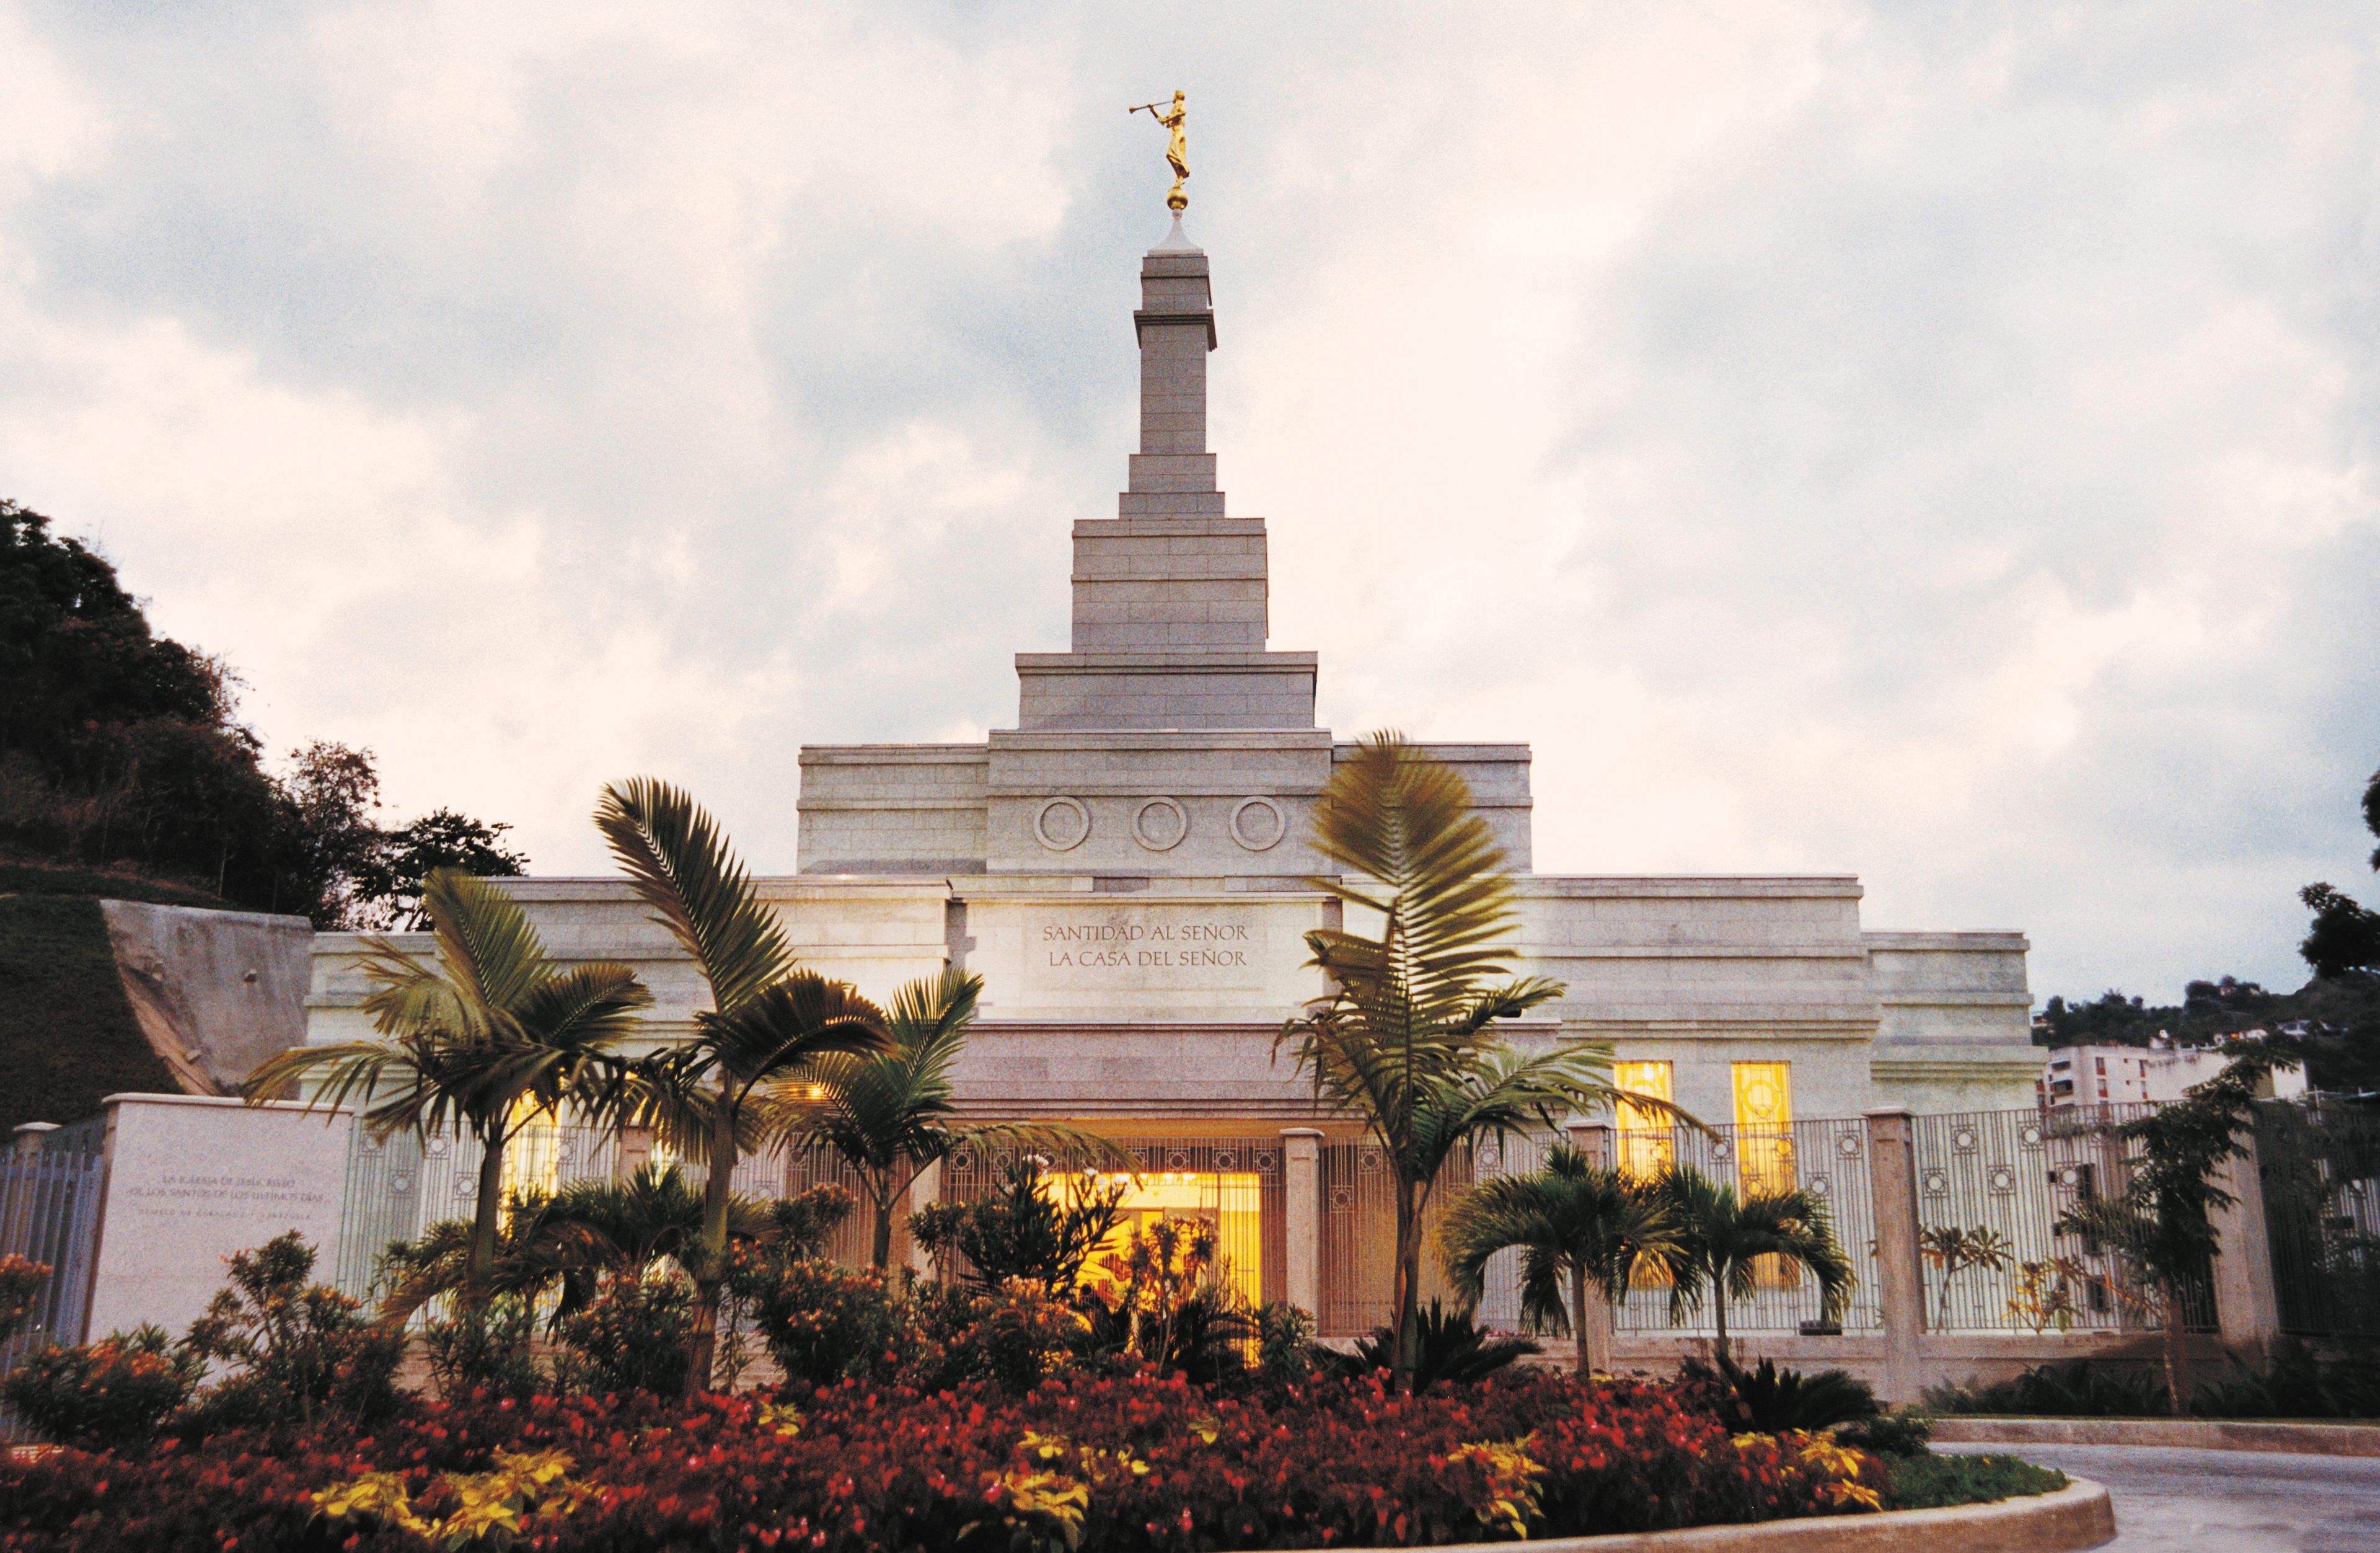 A front view of the Caracas Venezuela Temple on a cloudy day.